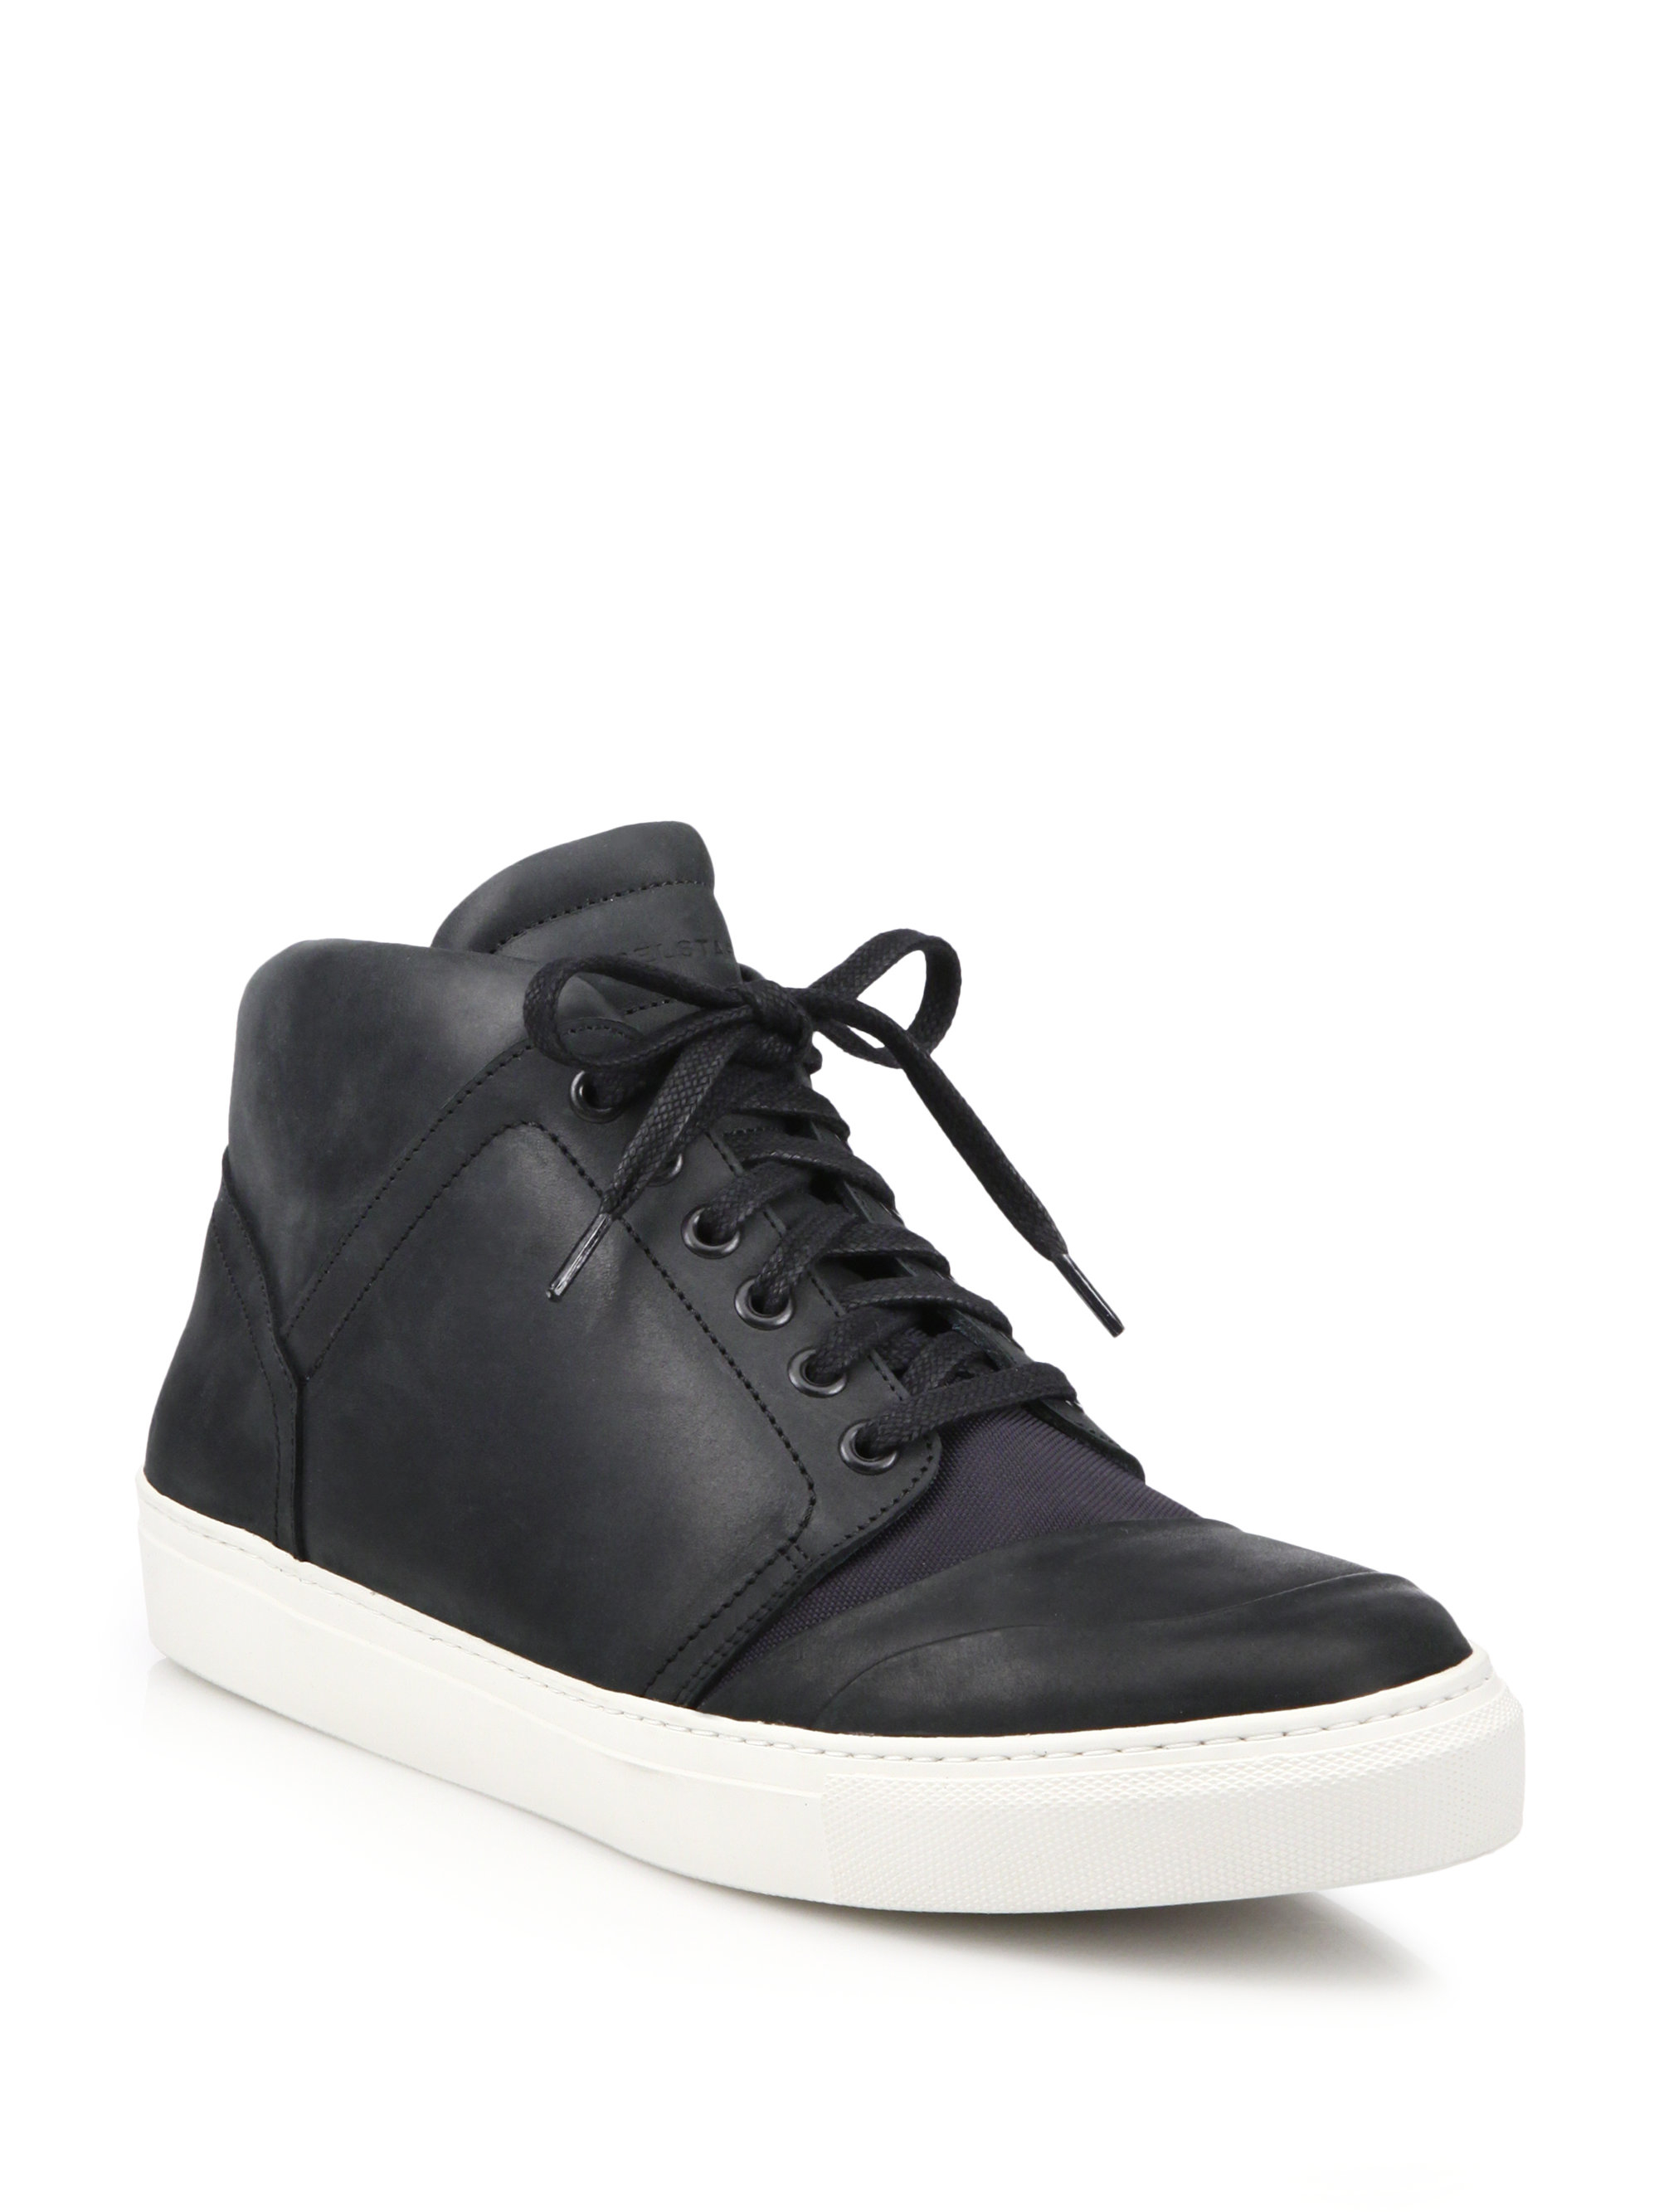 Lyst - Belstaff Streetmaster Leather & Rubber Mid-rise Sneakers in ...